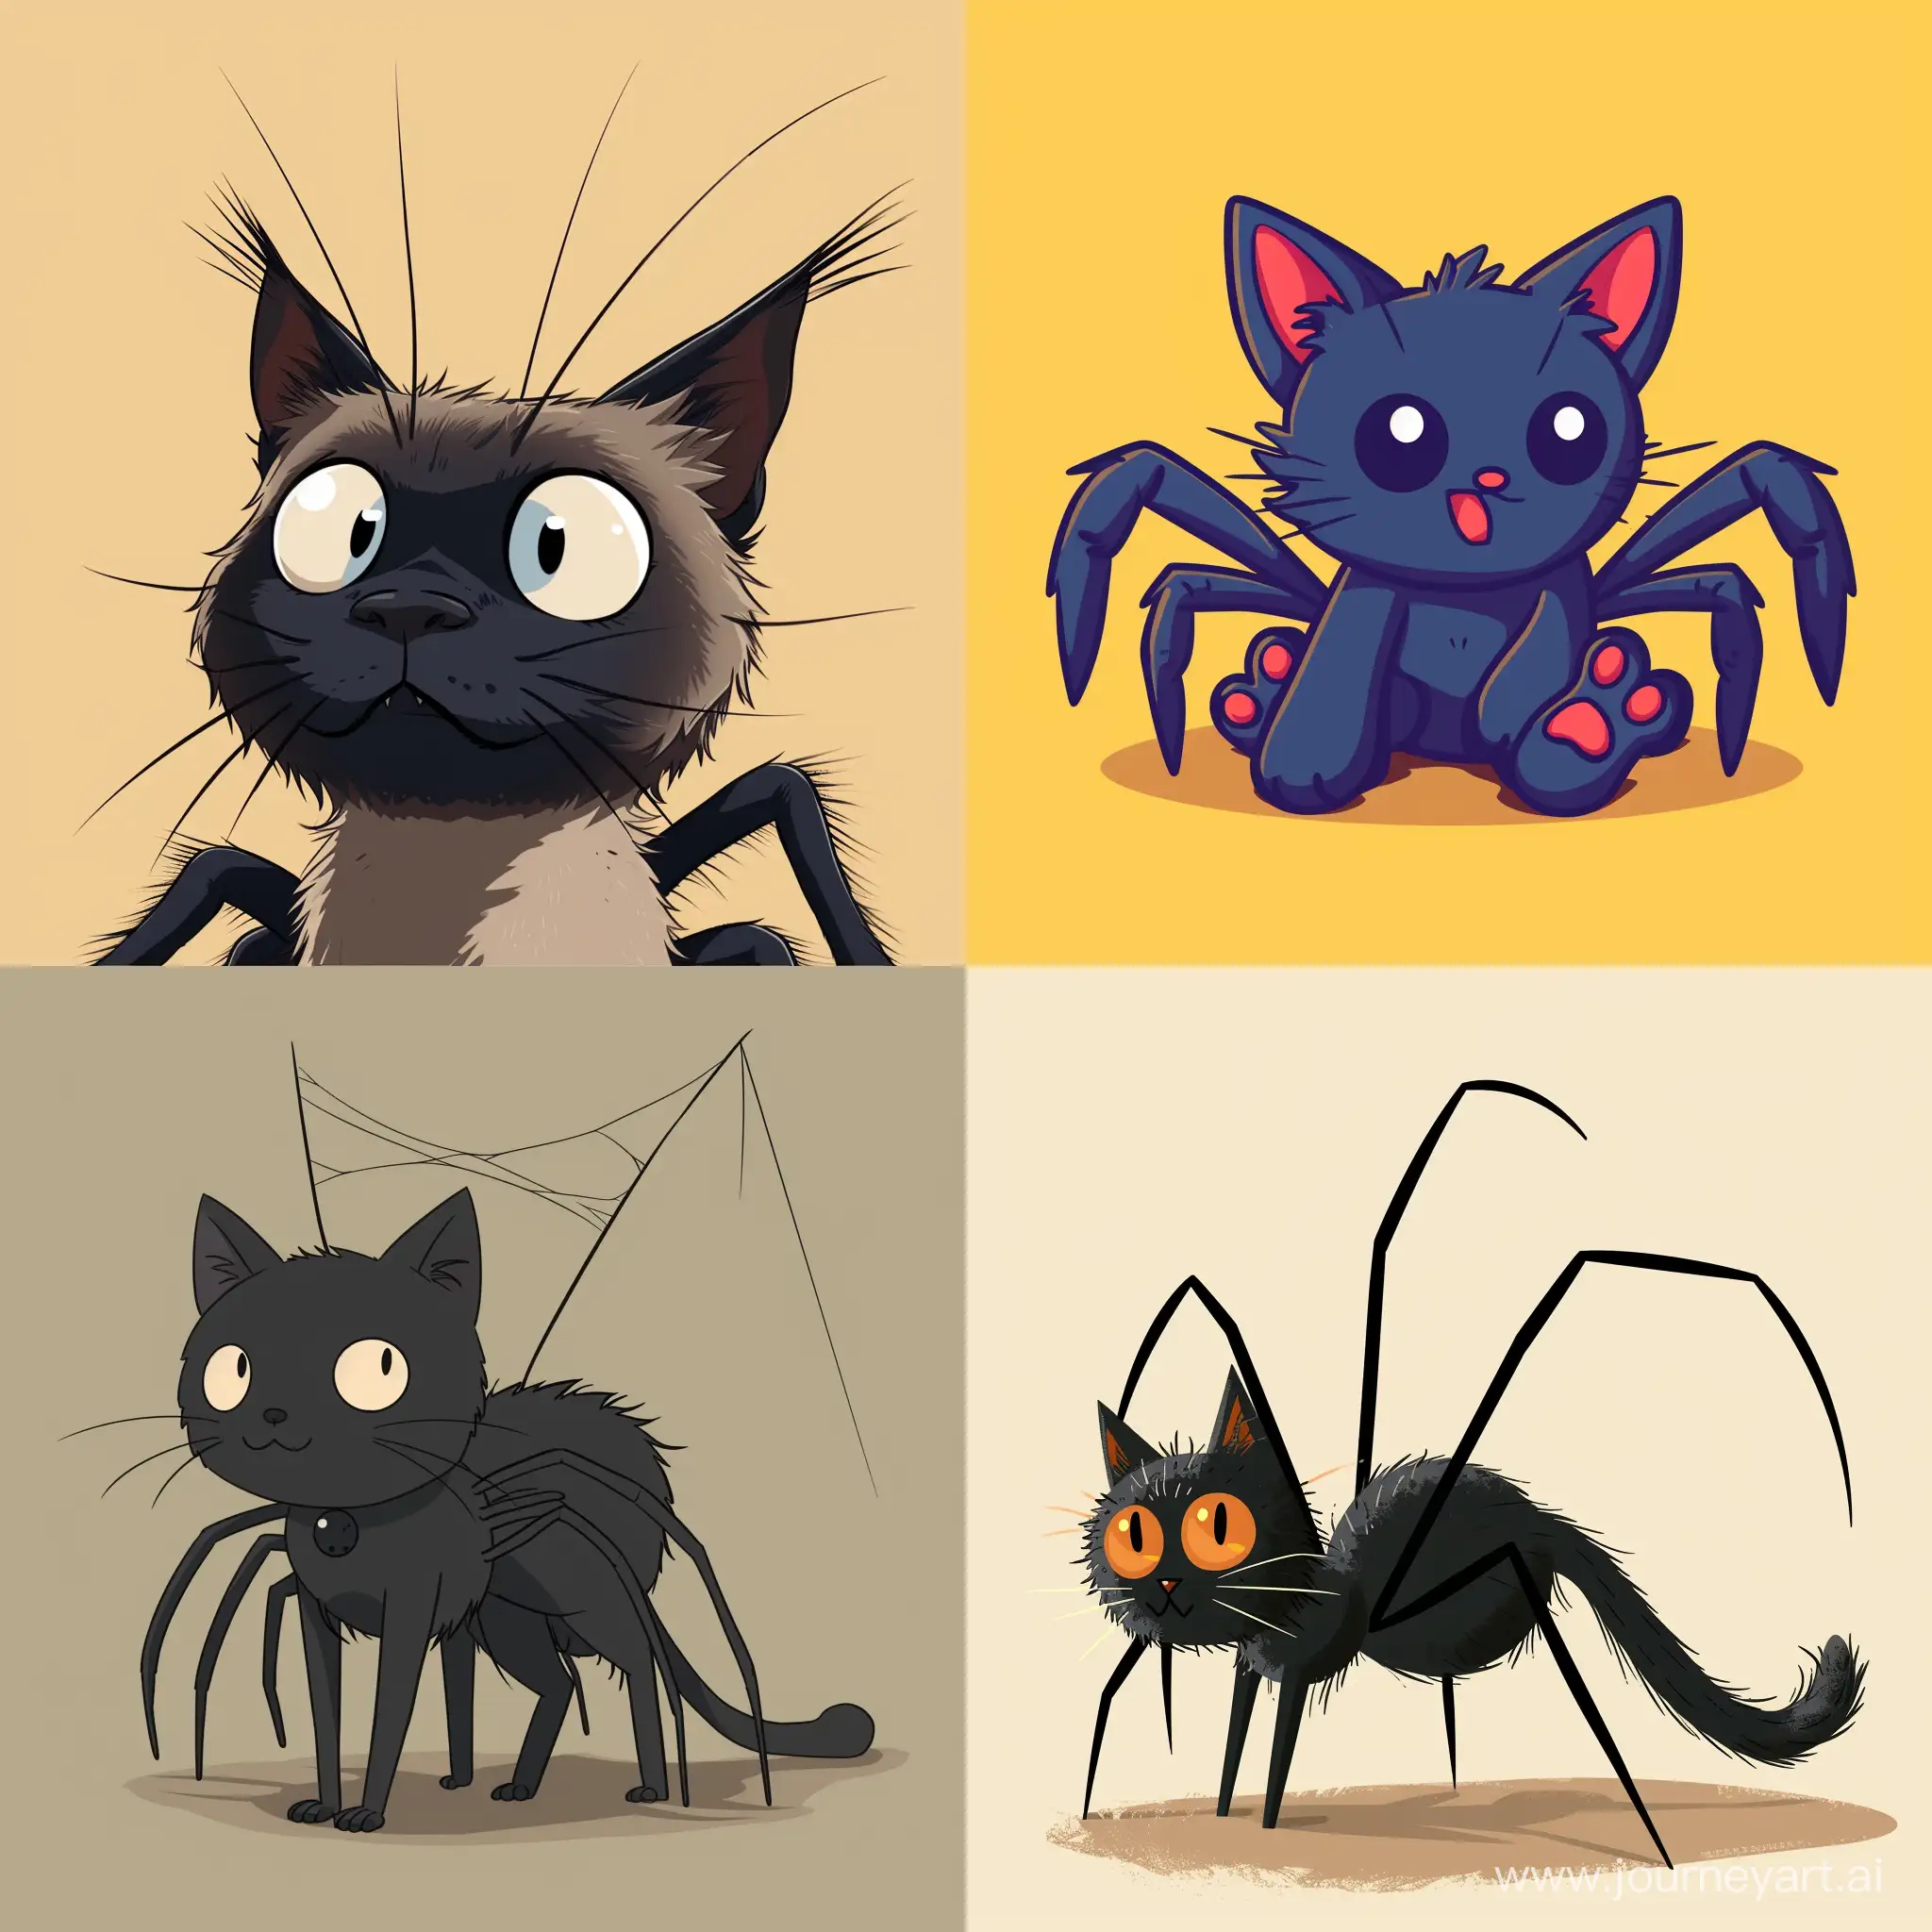 Playful-Cartoon-Cat-Interacts-with-Spider-in-Whimsical-Scene